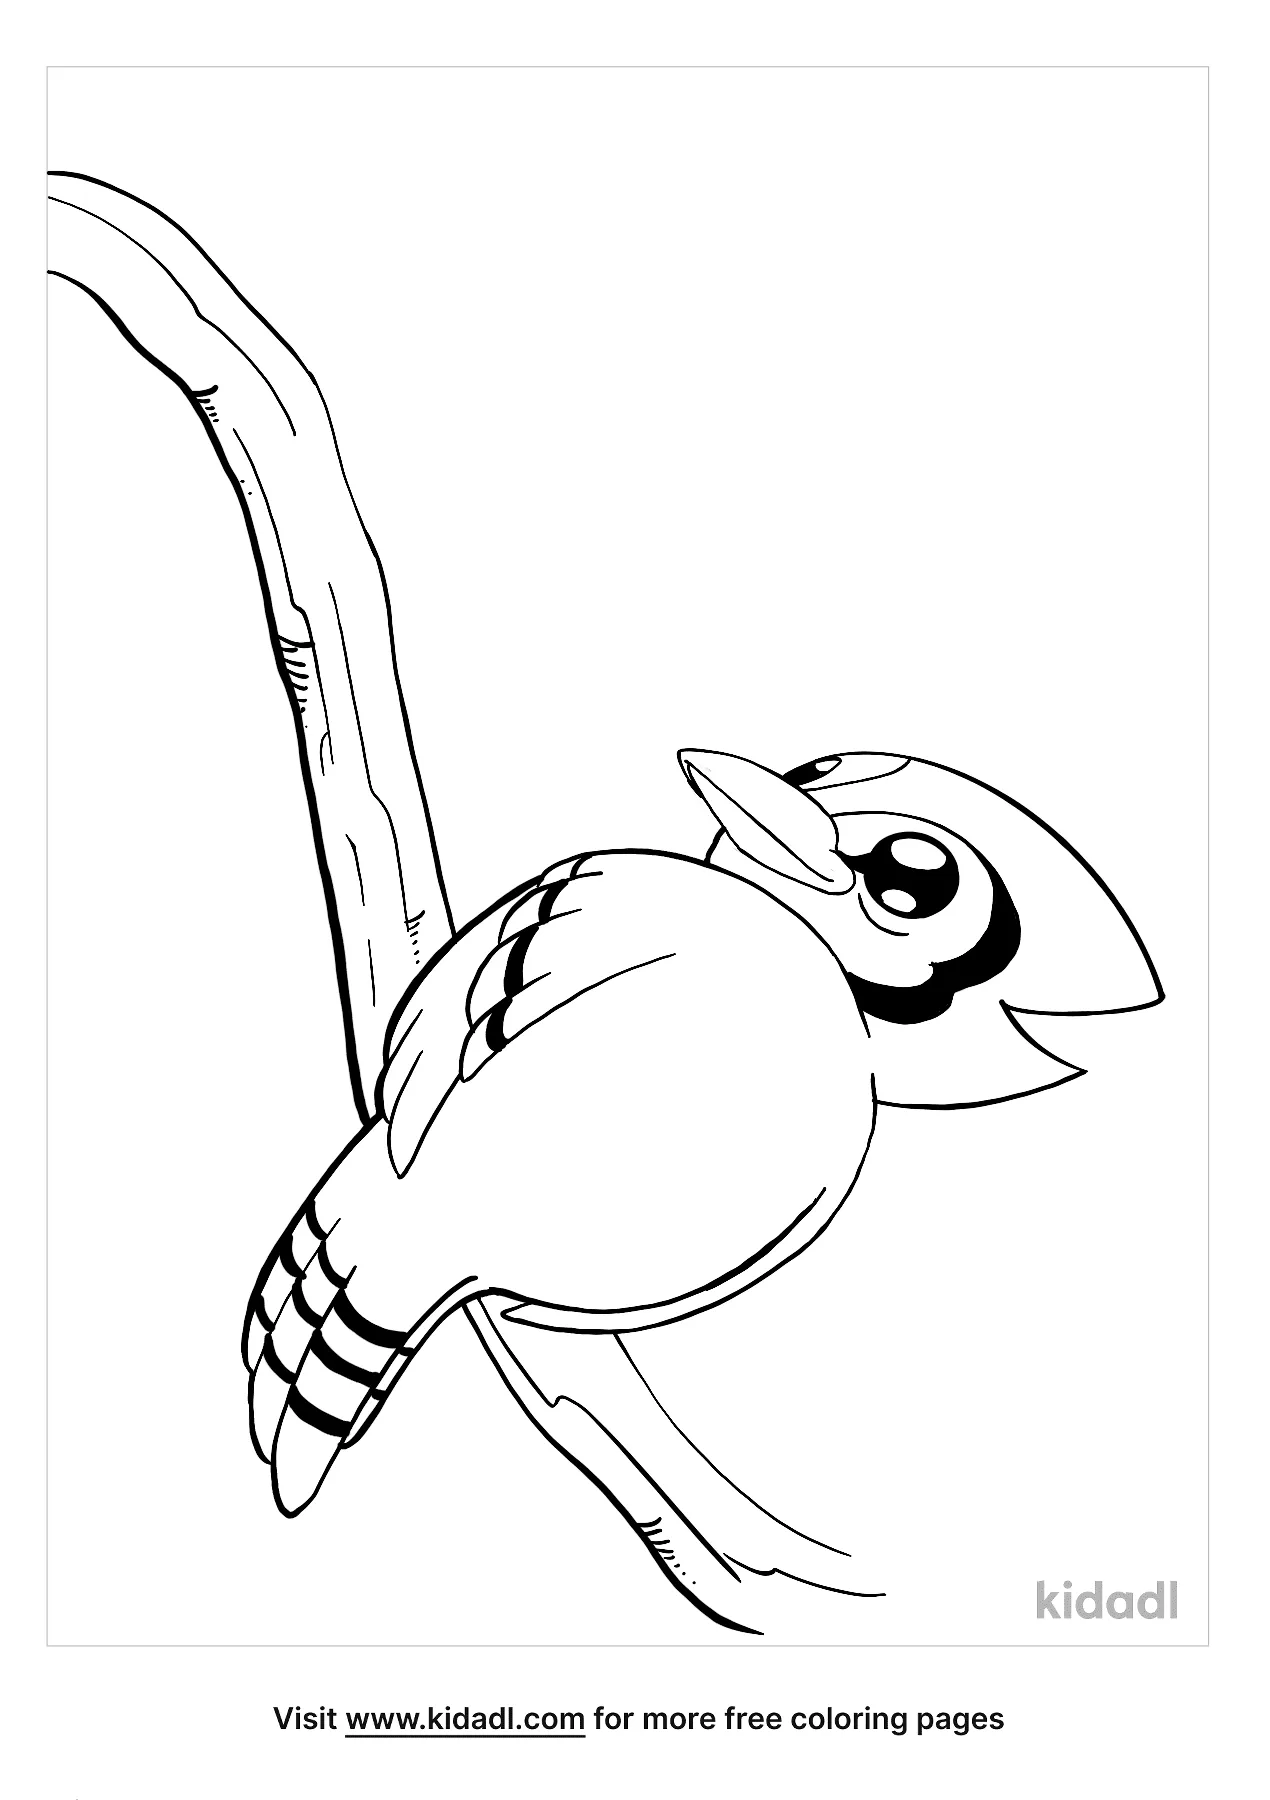 Blue Jay Coloring Pages   Free Birds Coloring Pages   Kidadl